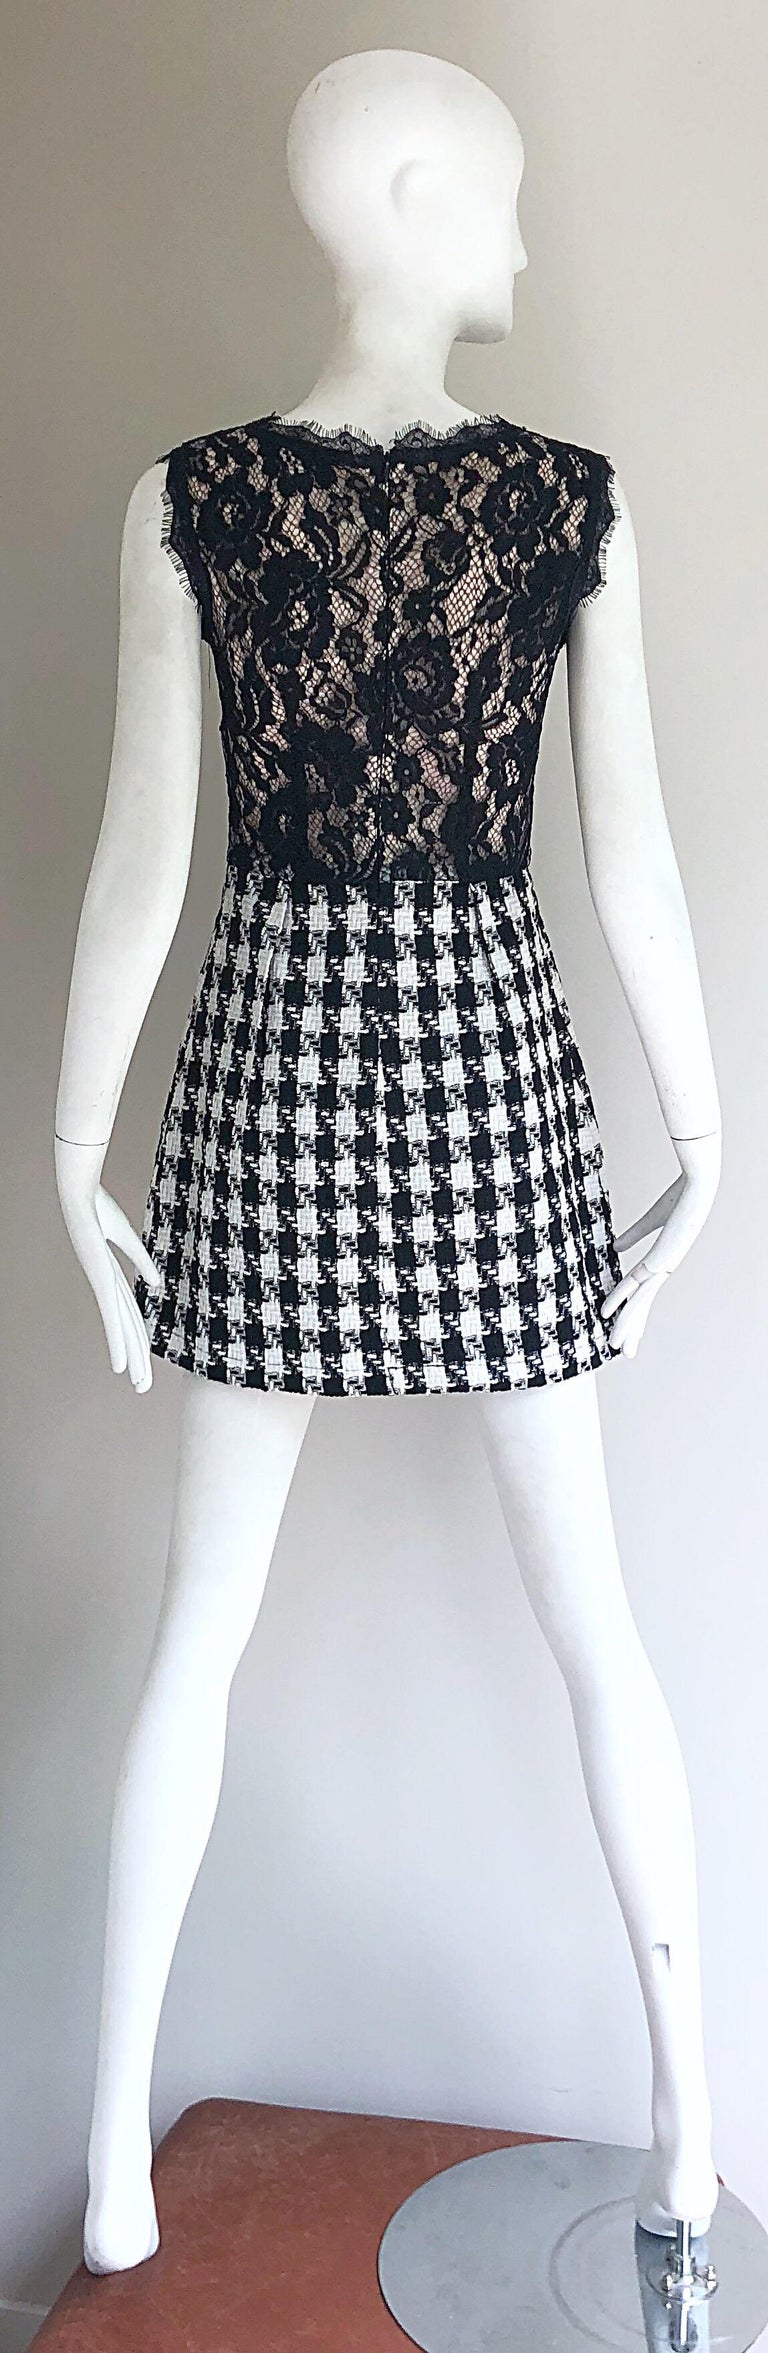 Marc Jacobs Early 2000s Black and White Lace Houndstooth Checkered Mini Dress For Sale 1